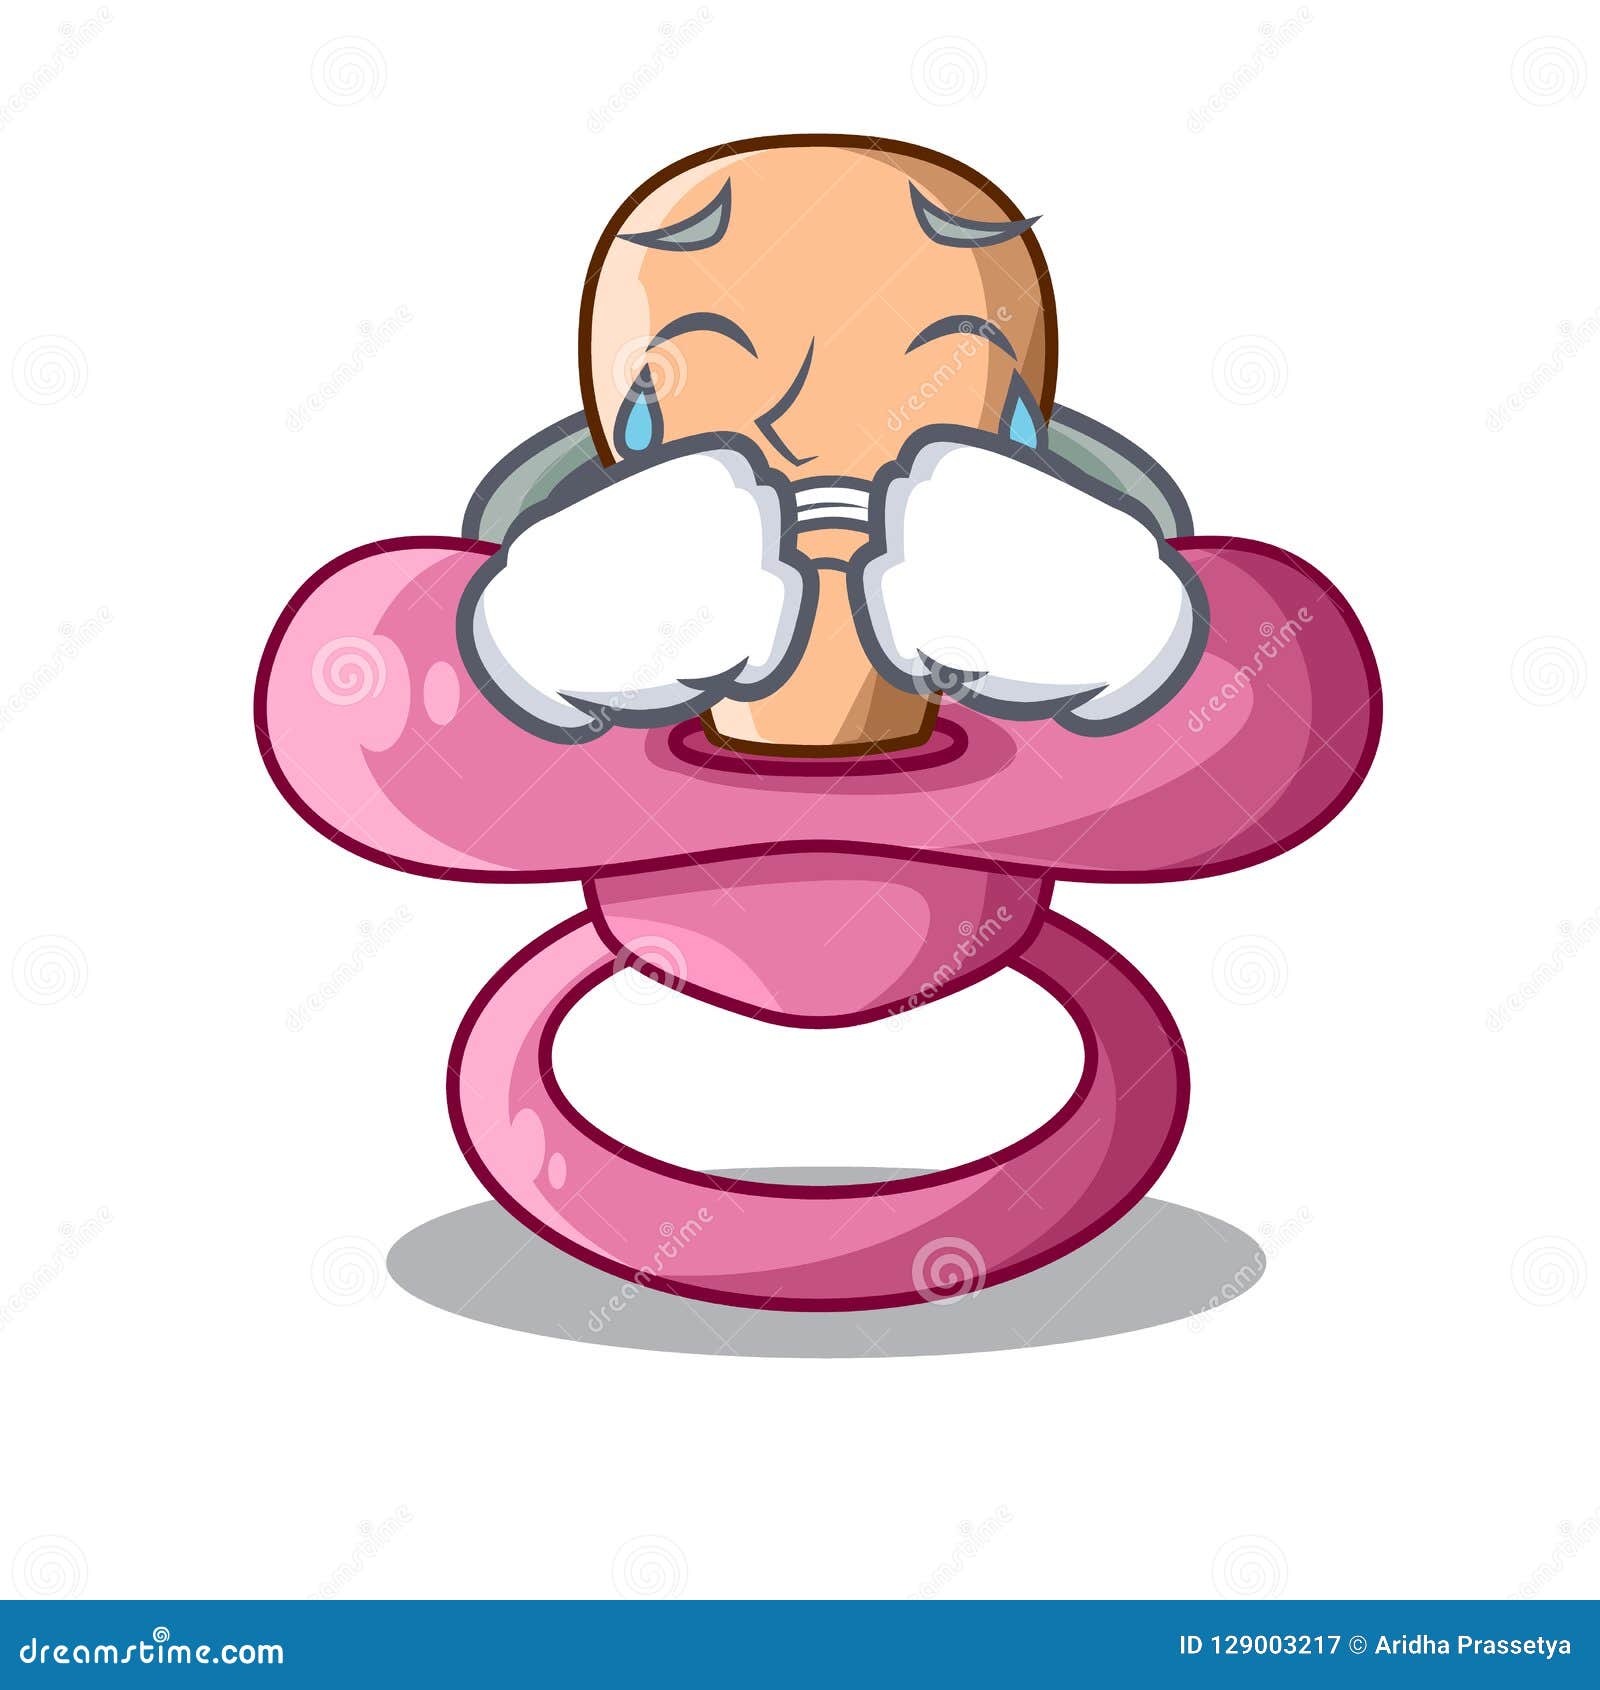 Crying Cartoon Pacifier for a Newborn Baby Stock Vector - Illustration